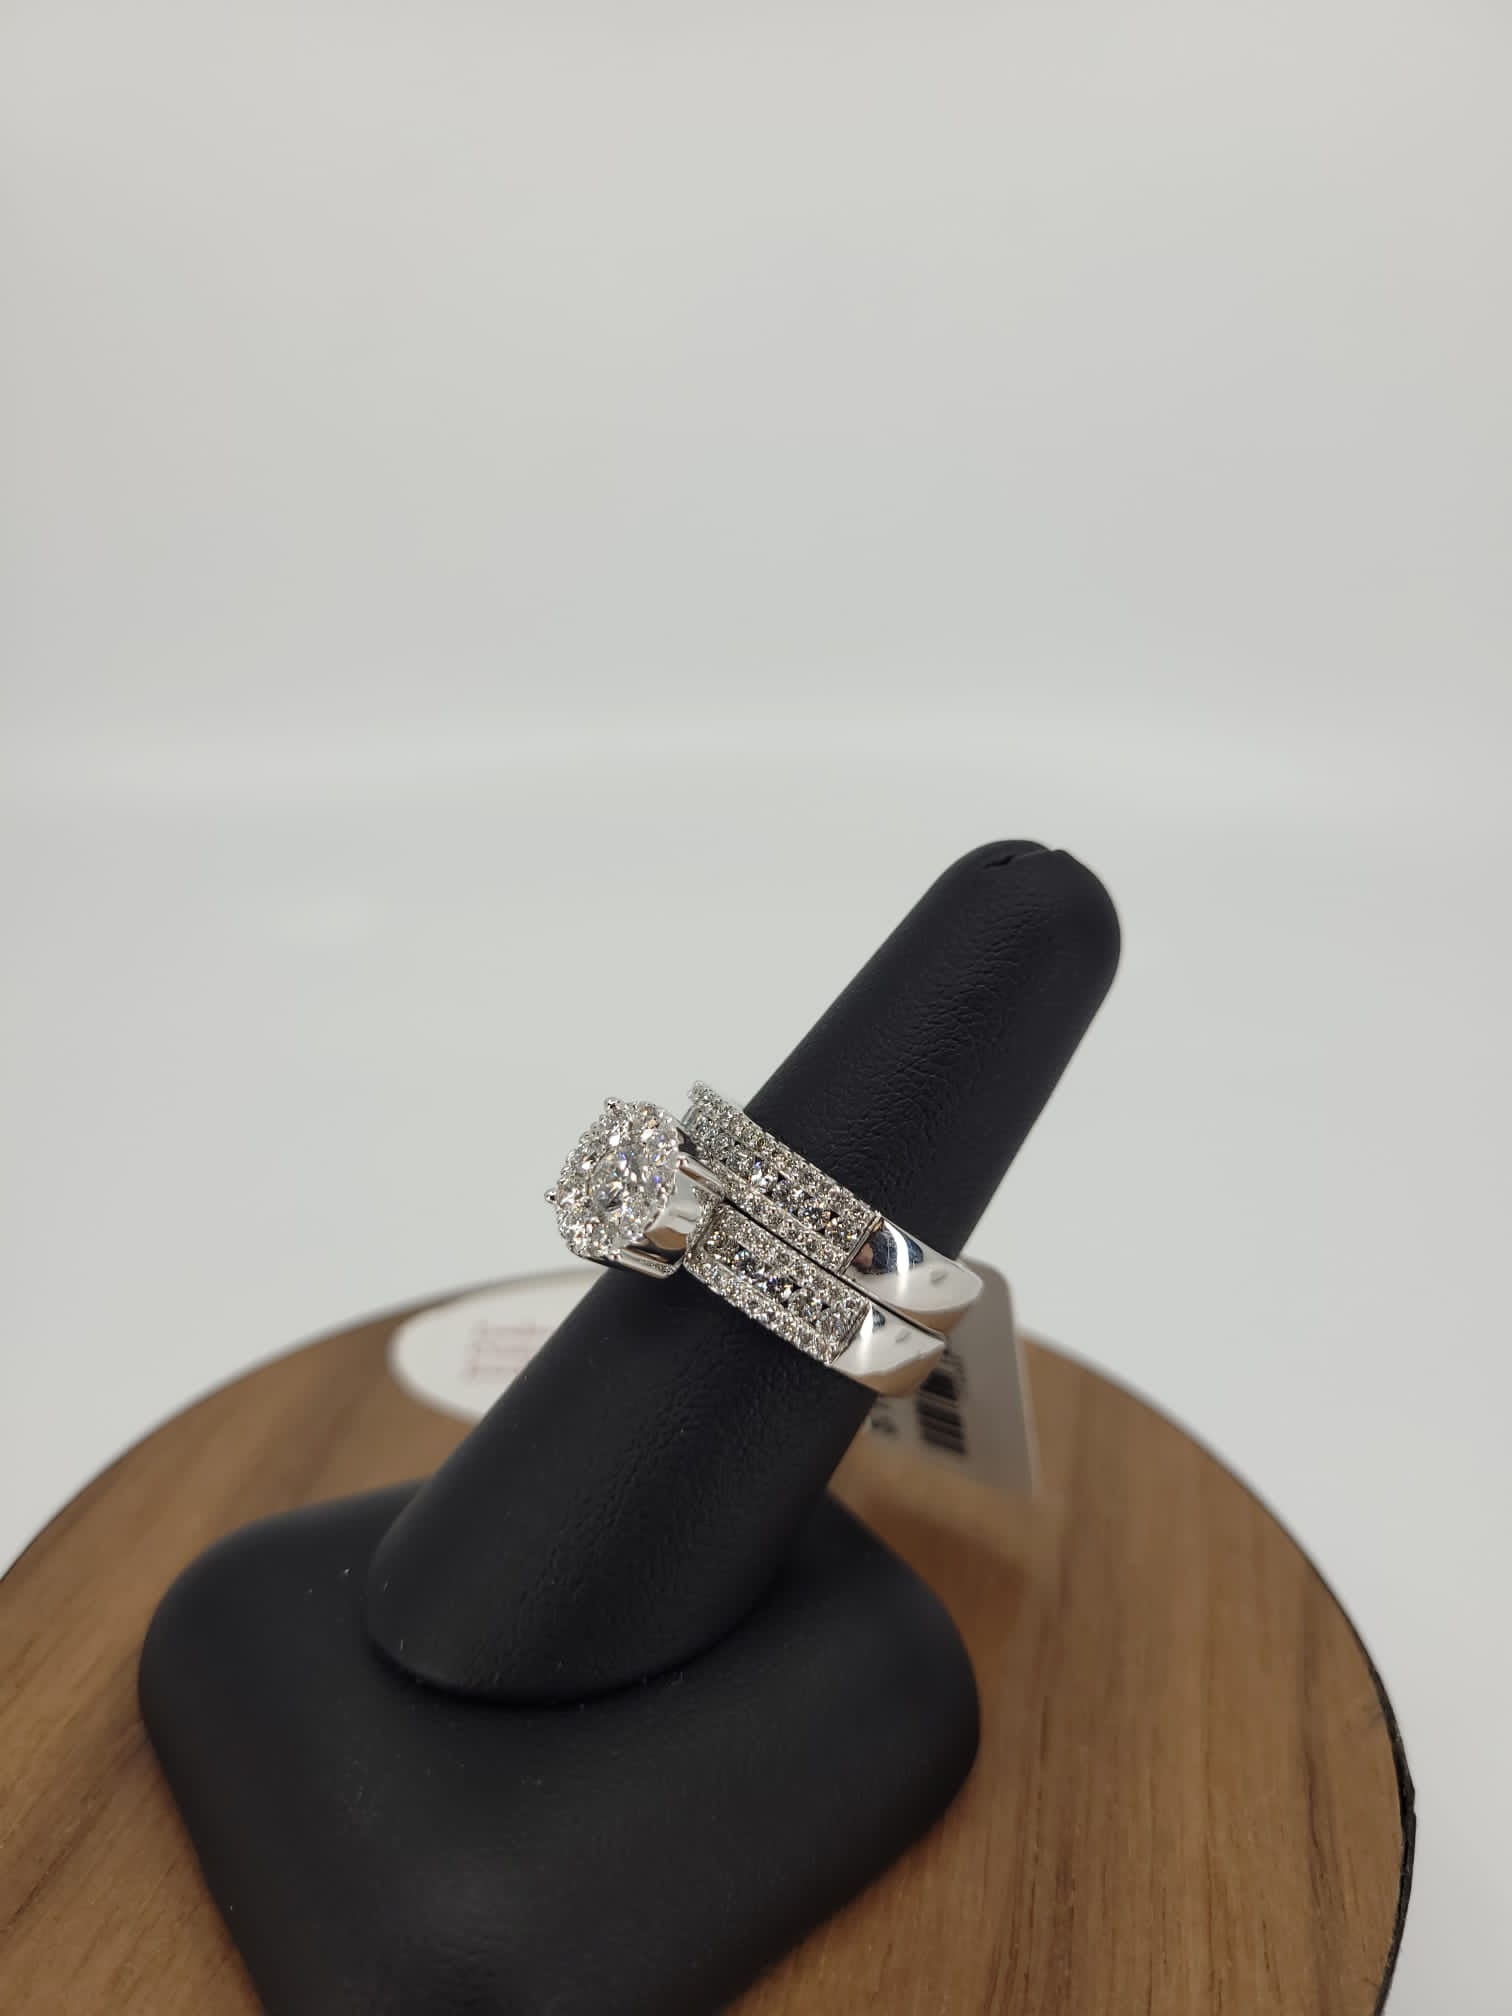 14K White Gold Cluster Setting Engagement Ring with .25 Carat Diamond Center Stone on an Invisible Halo Setting